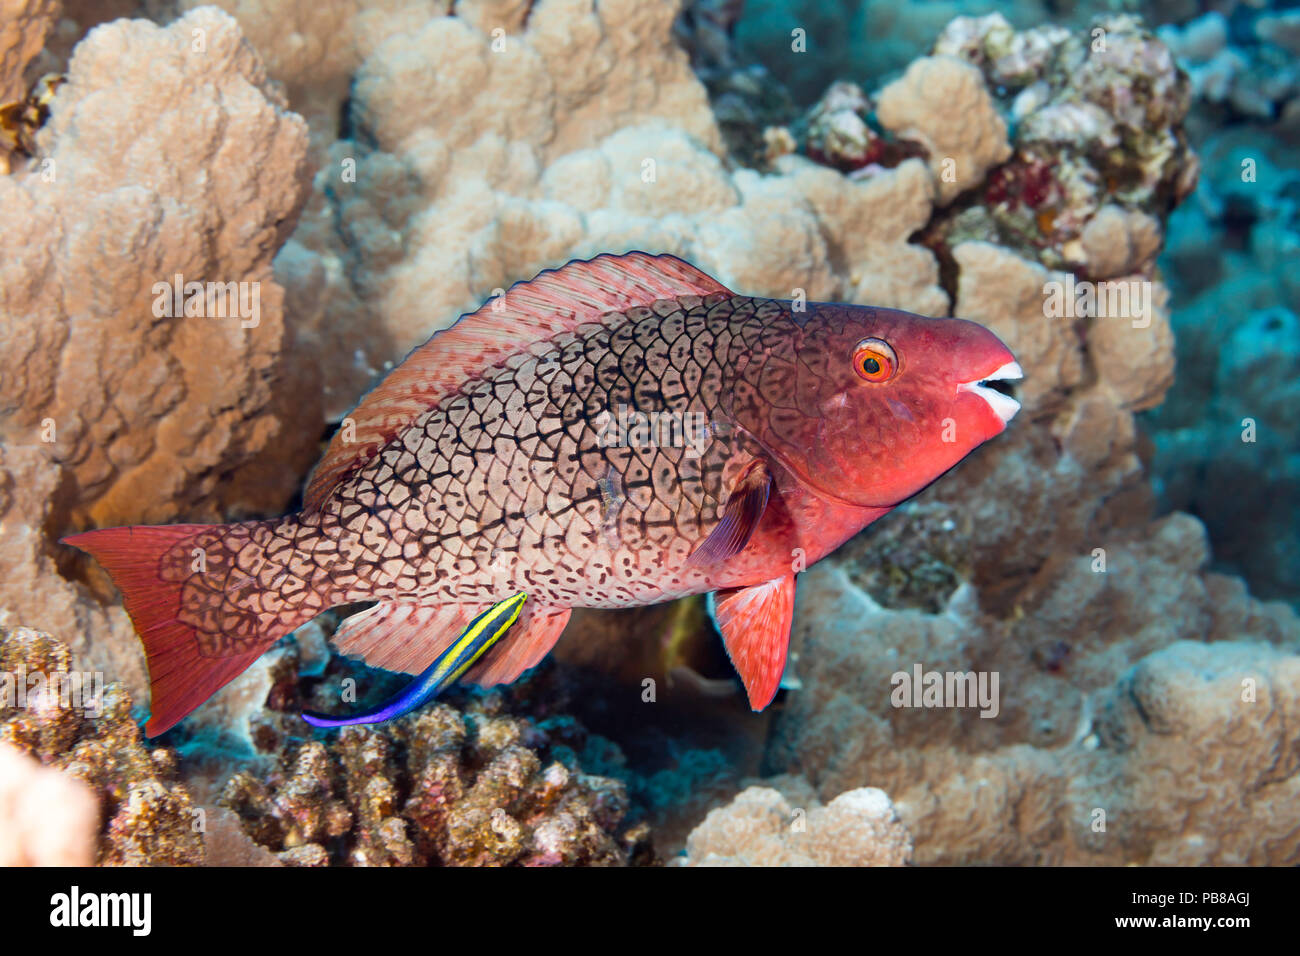 The initial phase of a redlip parrotfish, Scarus rubroviolaceus. This individual is being cleaned by an endemic Hawaiian cleaner wrasse, Labroides pht Stock Photo